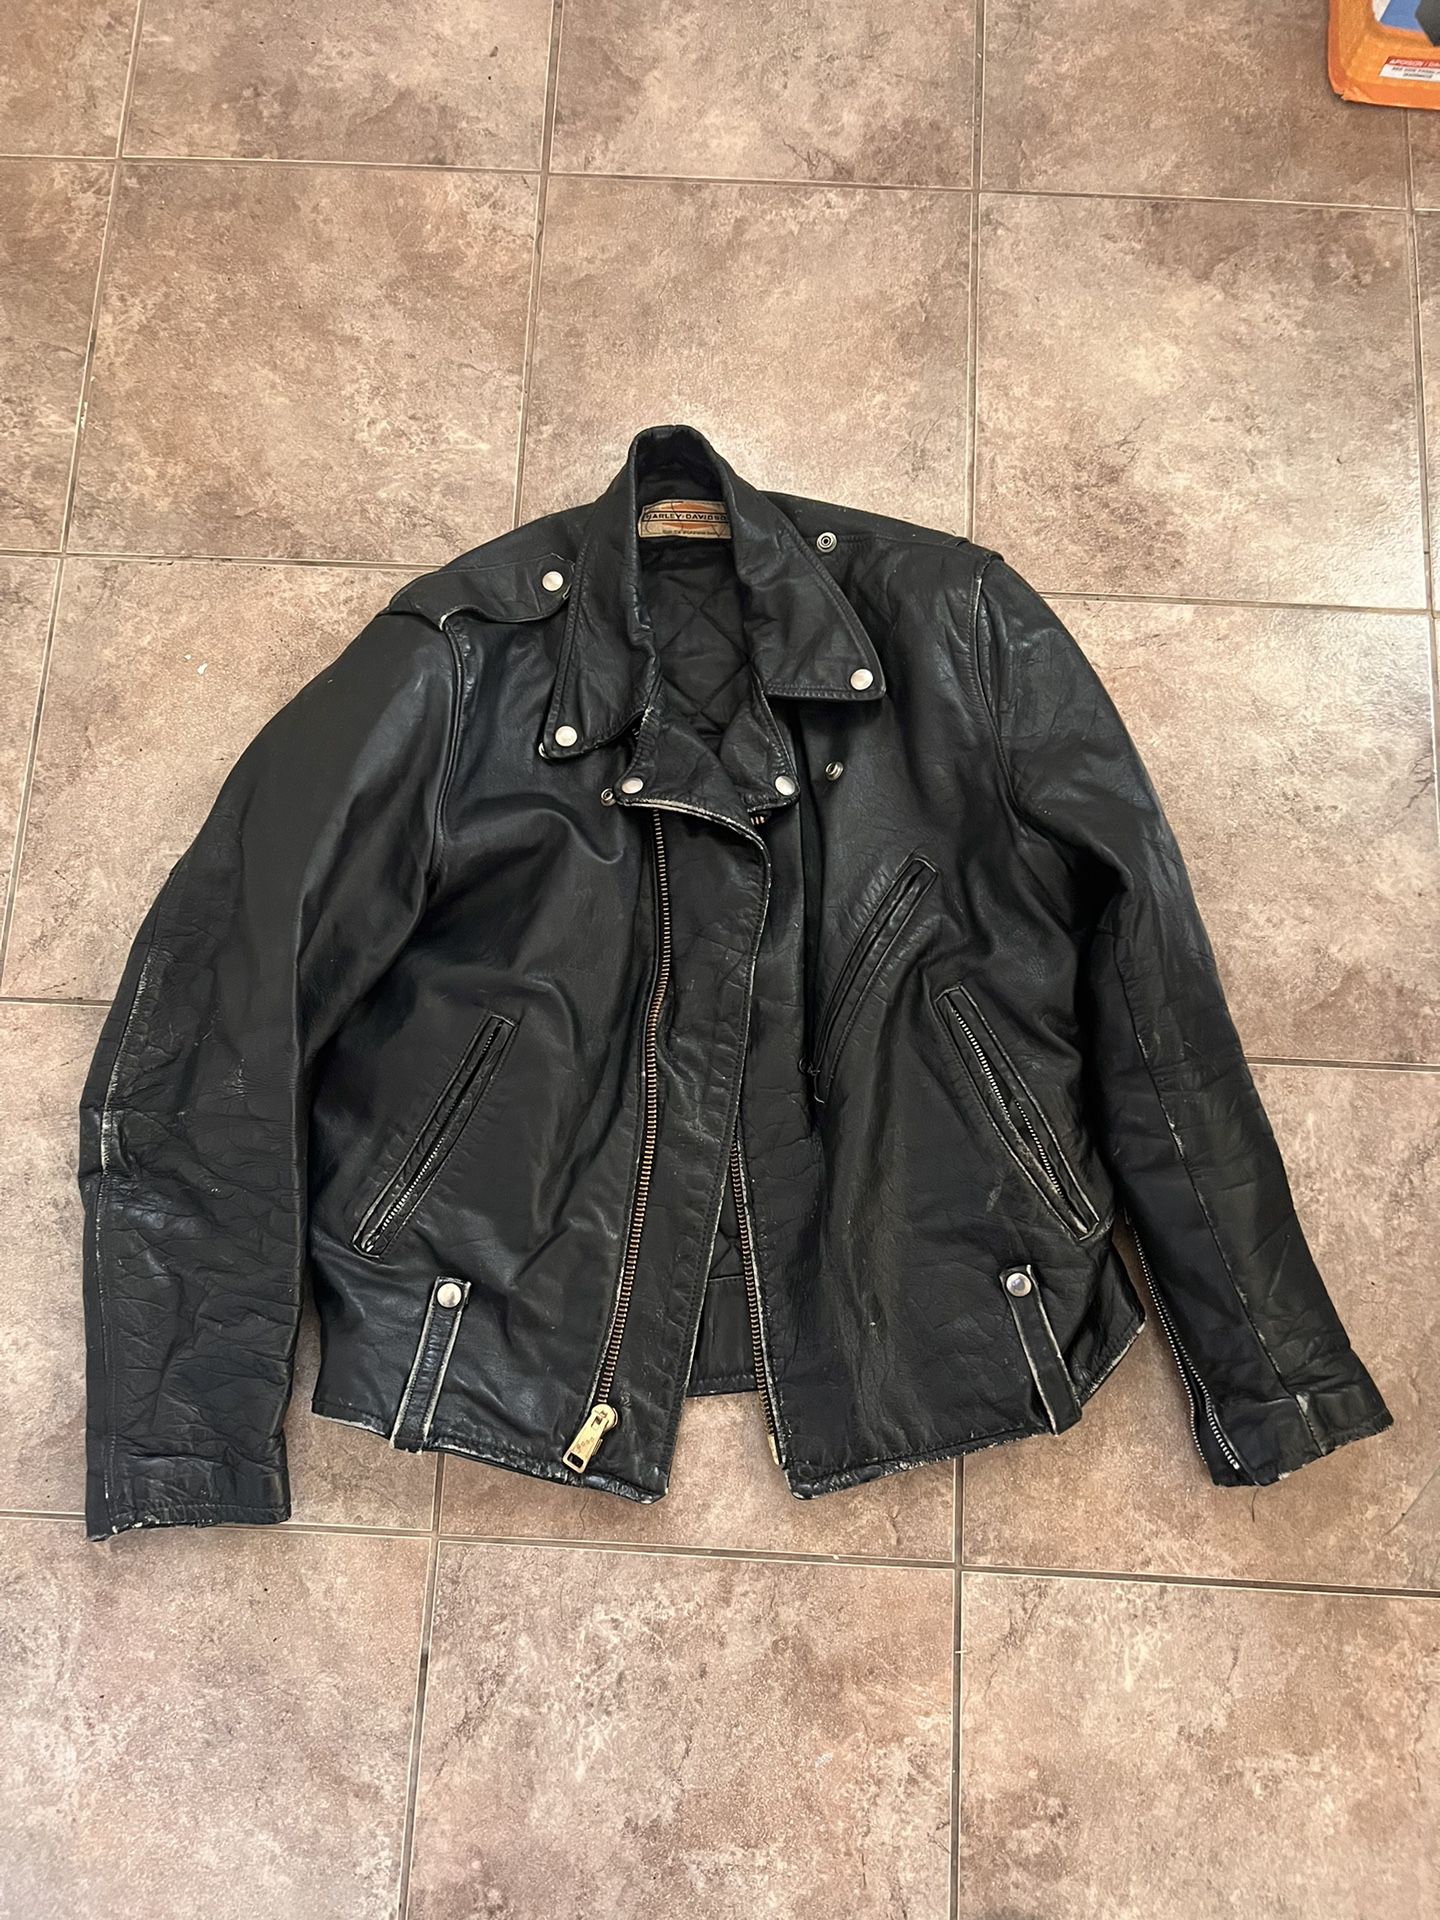 Vintage Harley Leather Jacket, rare, Find Hard To Come By